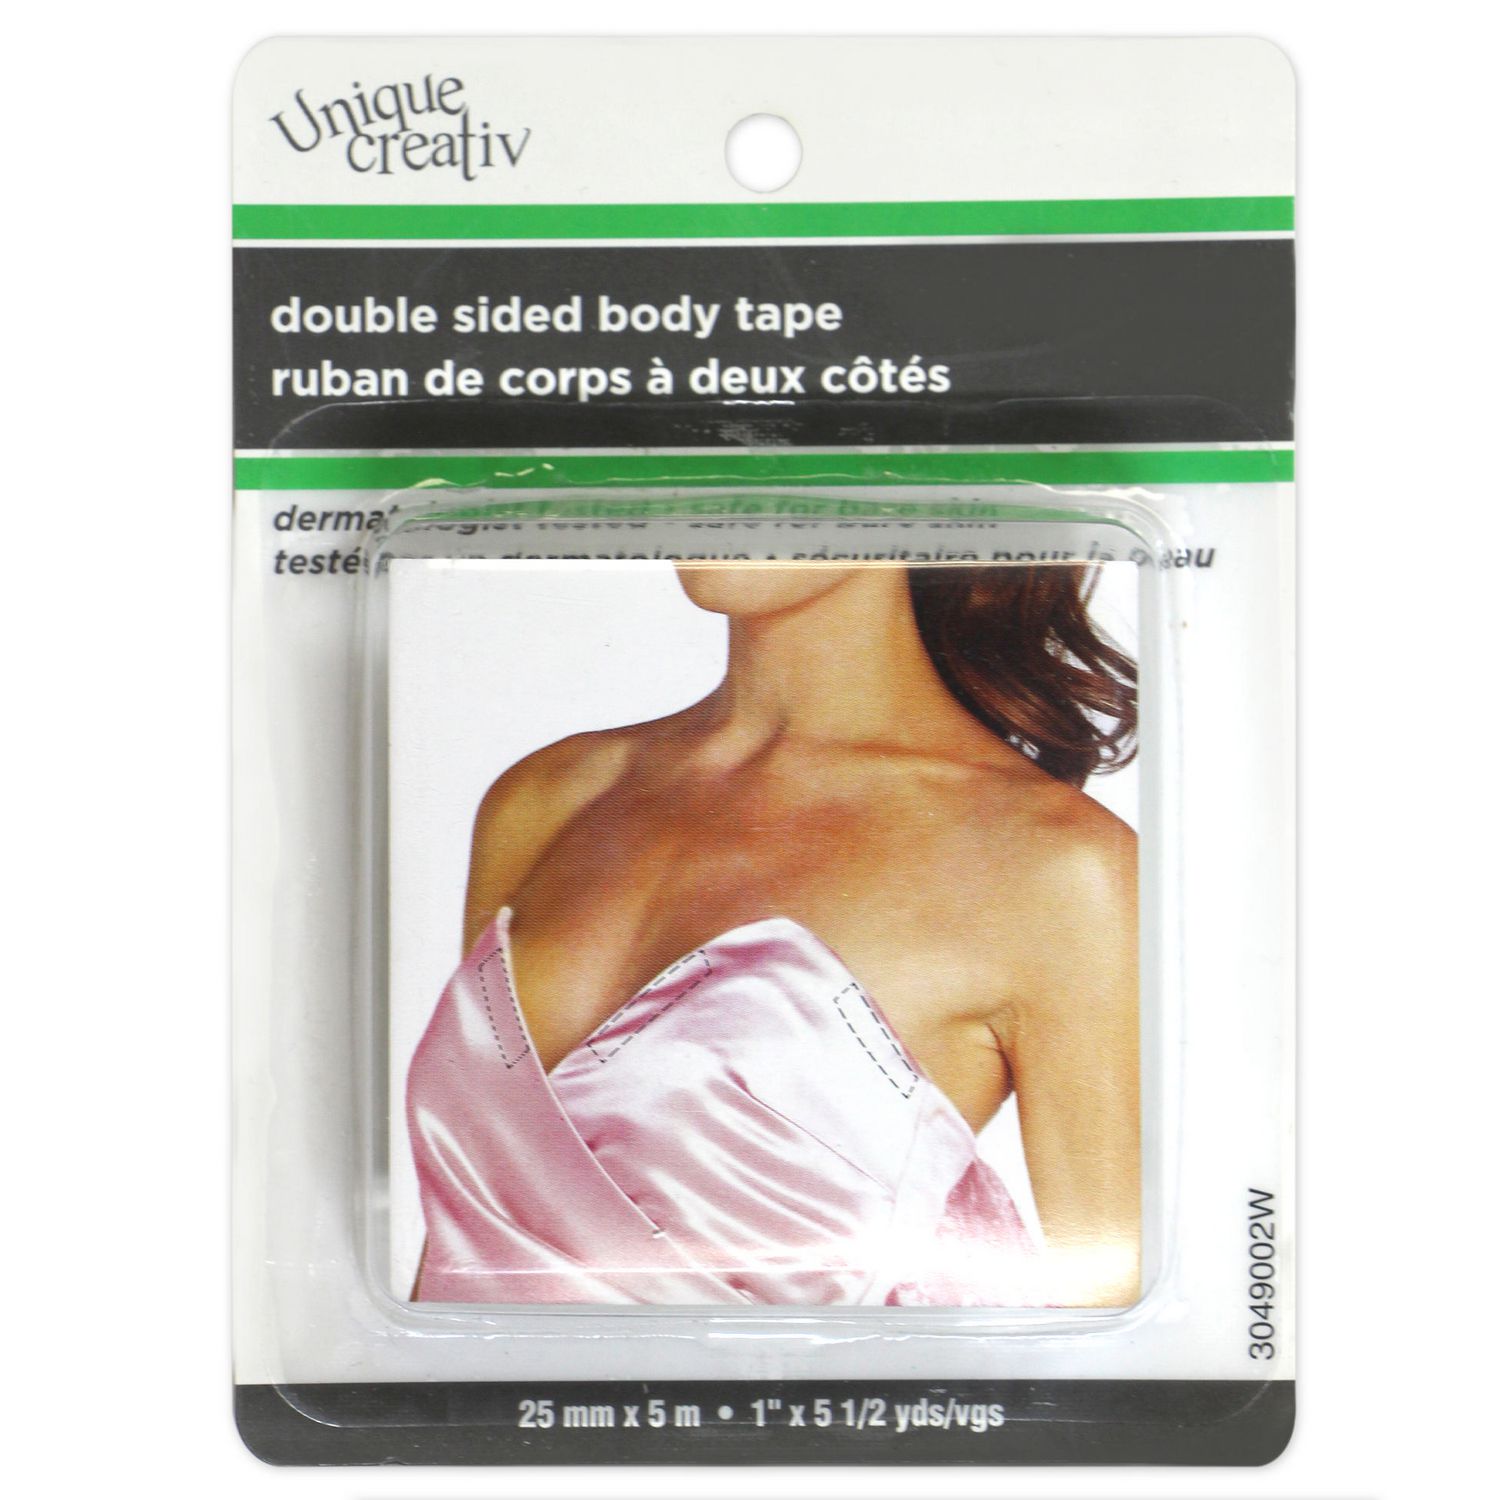 double sided body tape near me